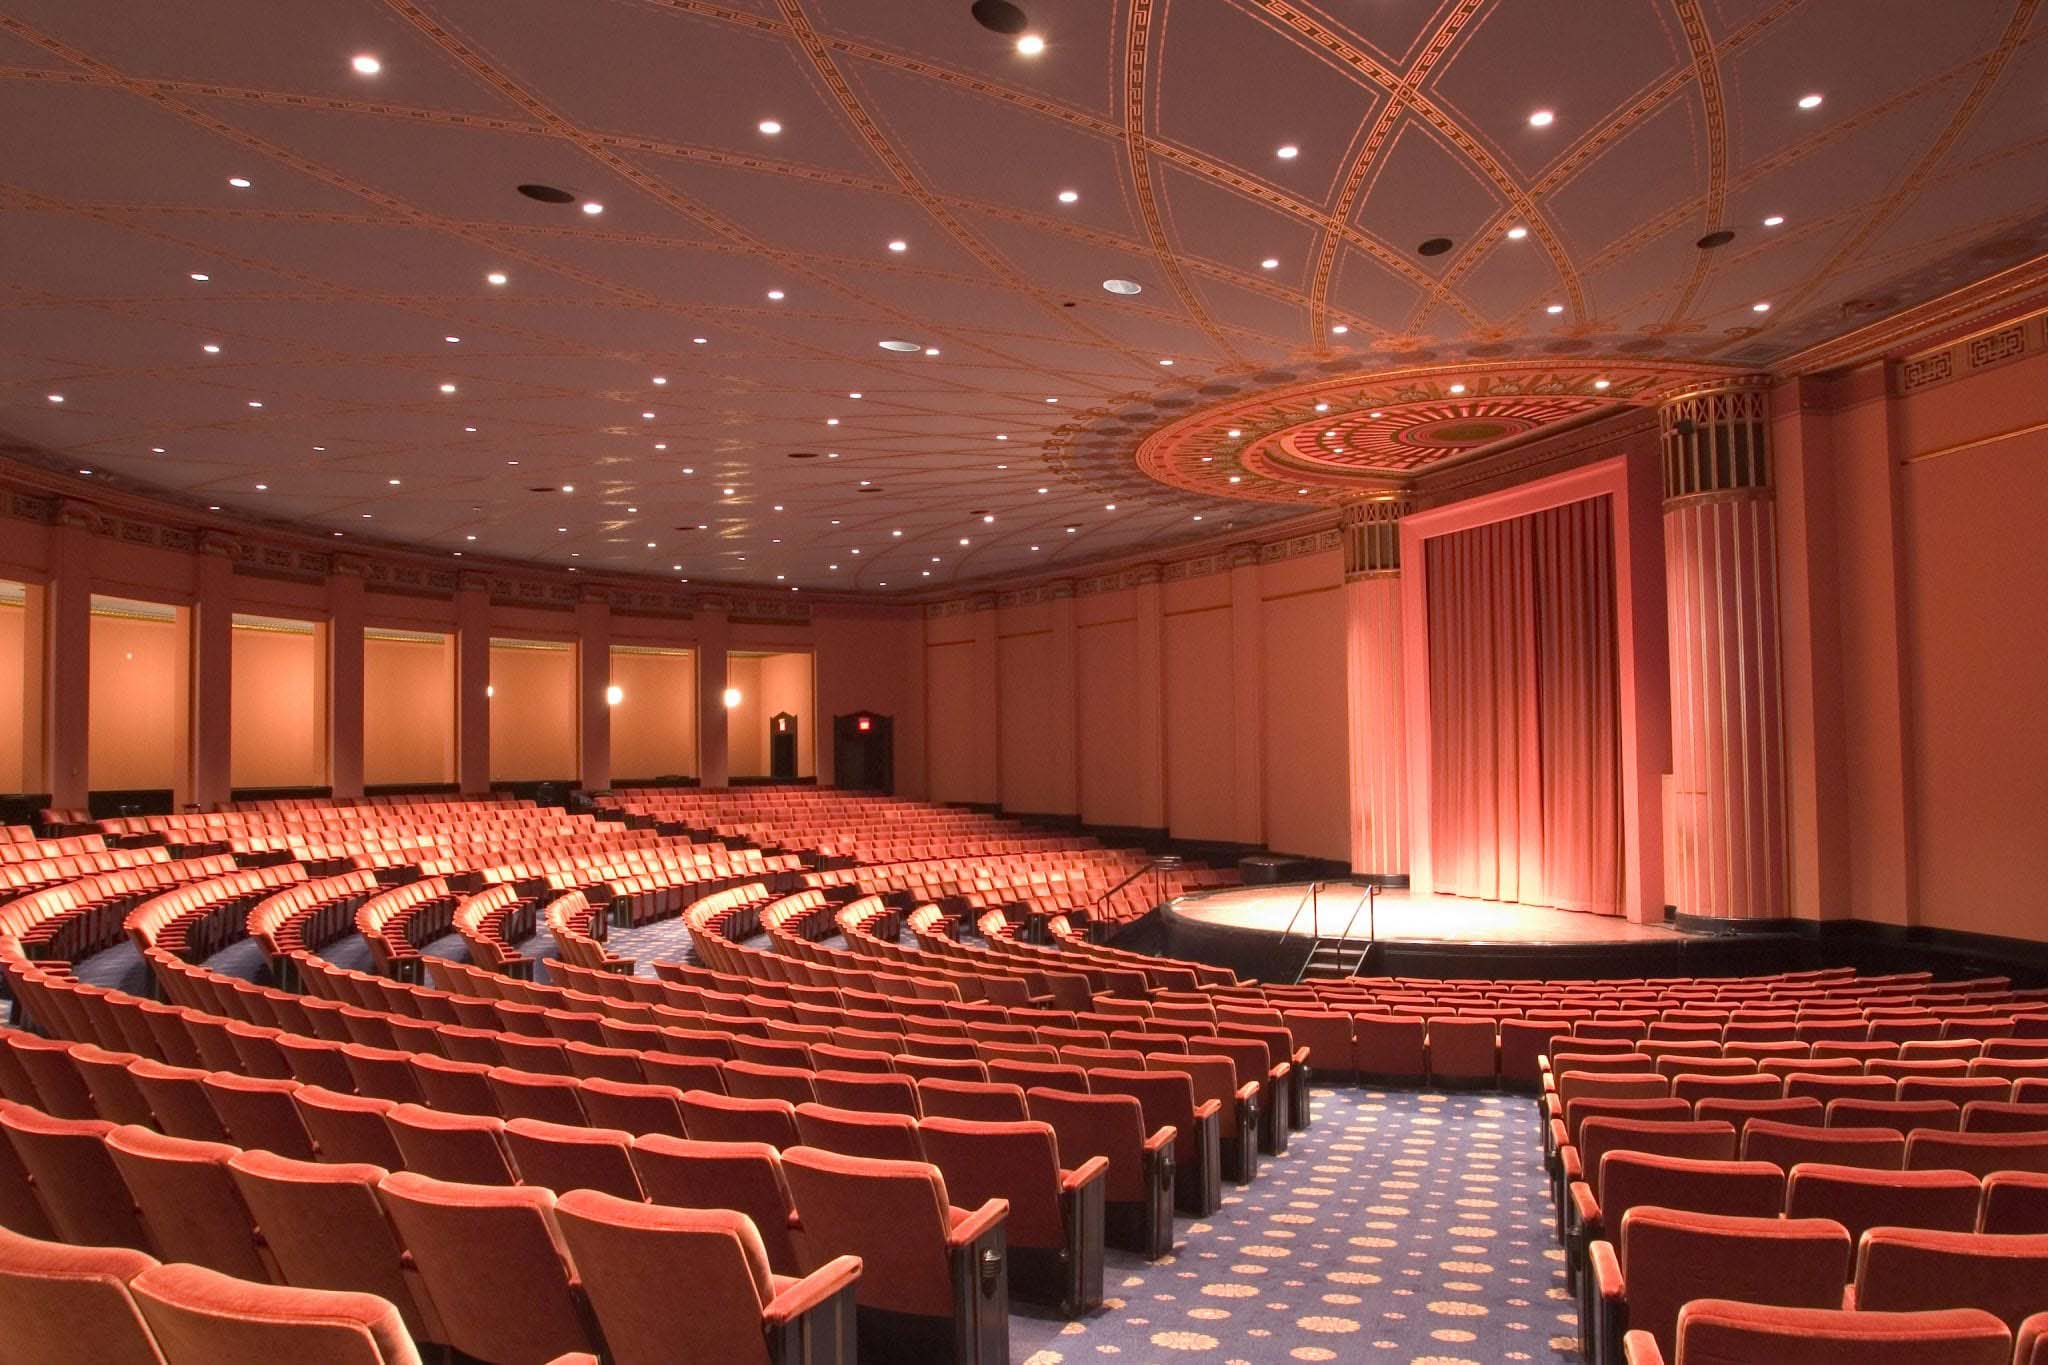 A semi-circular stage is surrounded by slightly sloped isles and plush theater seating